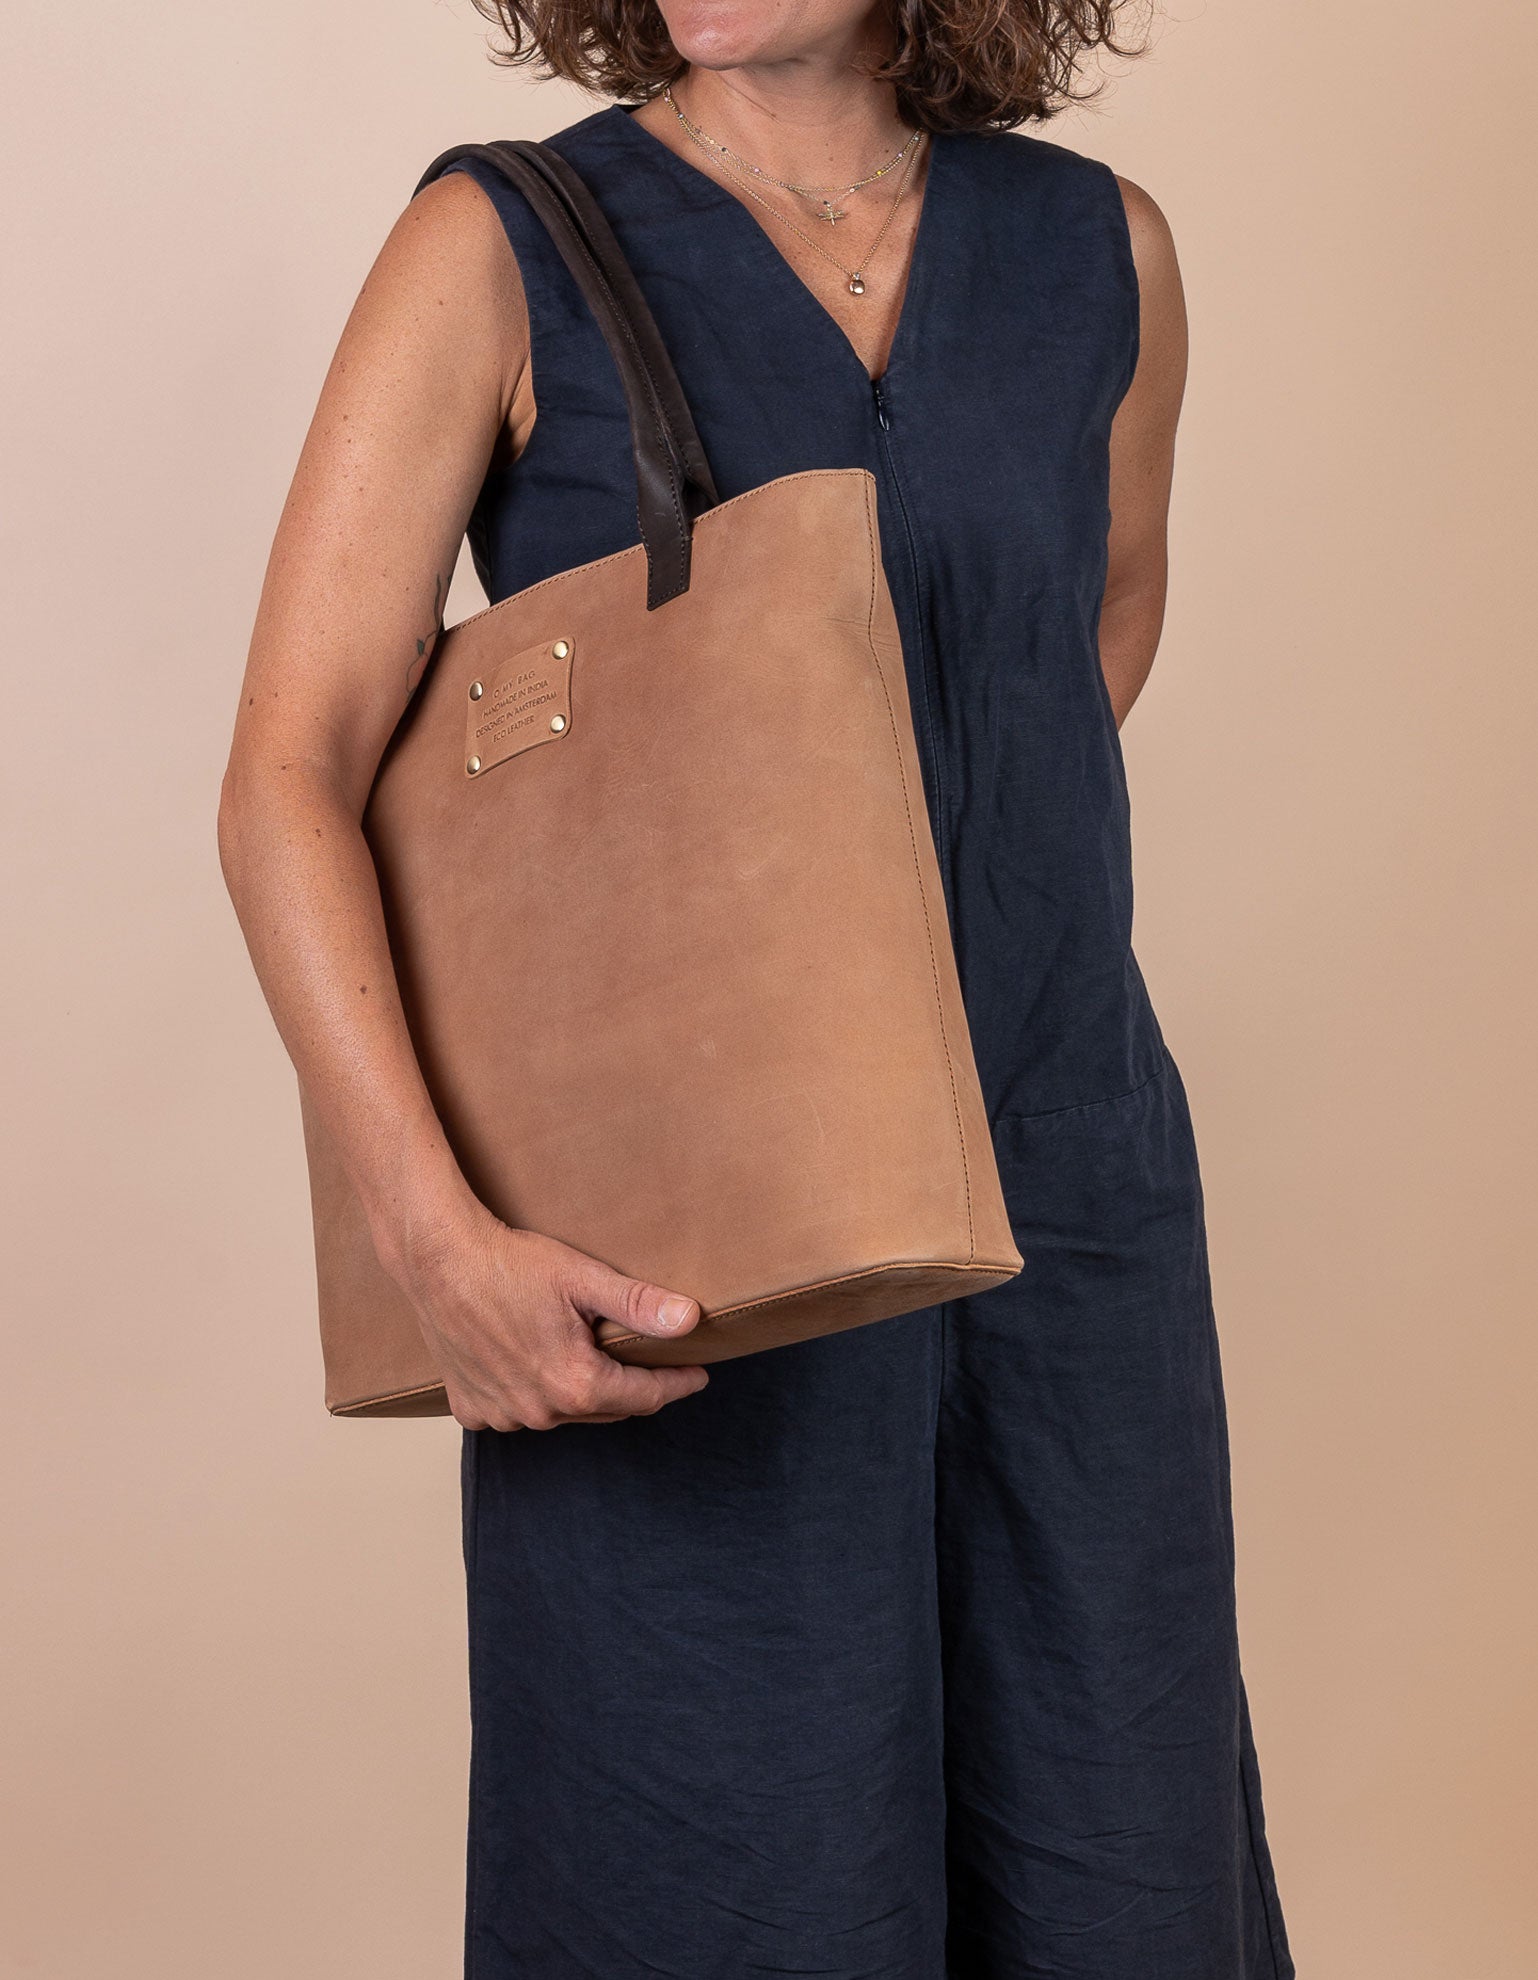 Posh Stacey Tote Bag in Camel Hunter Leather - third model product image